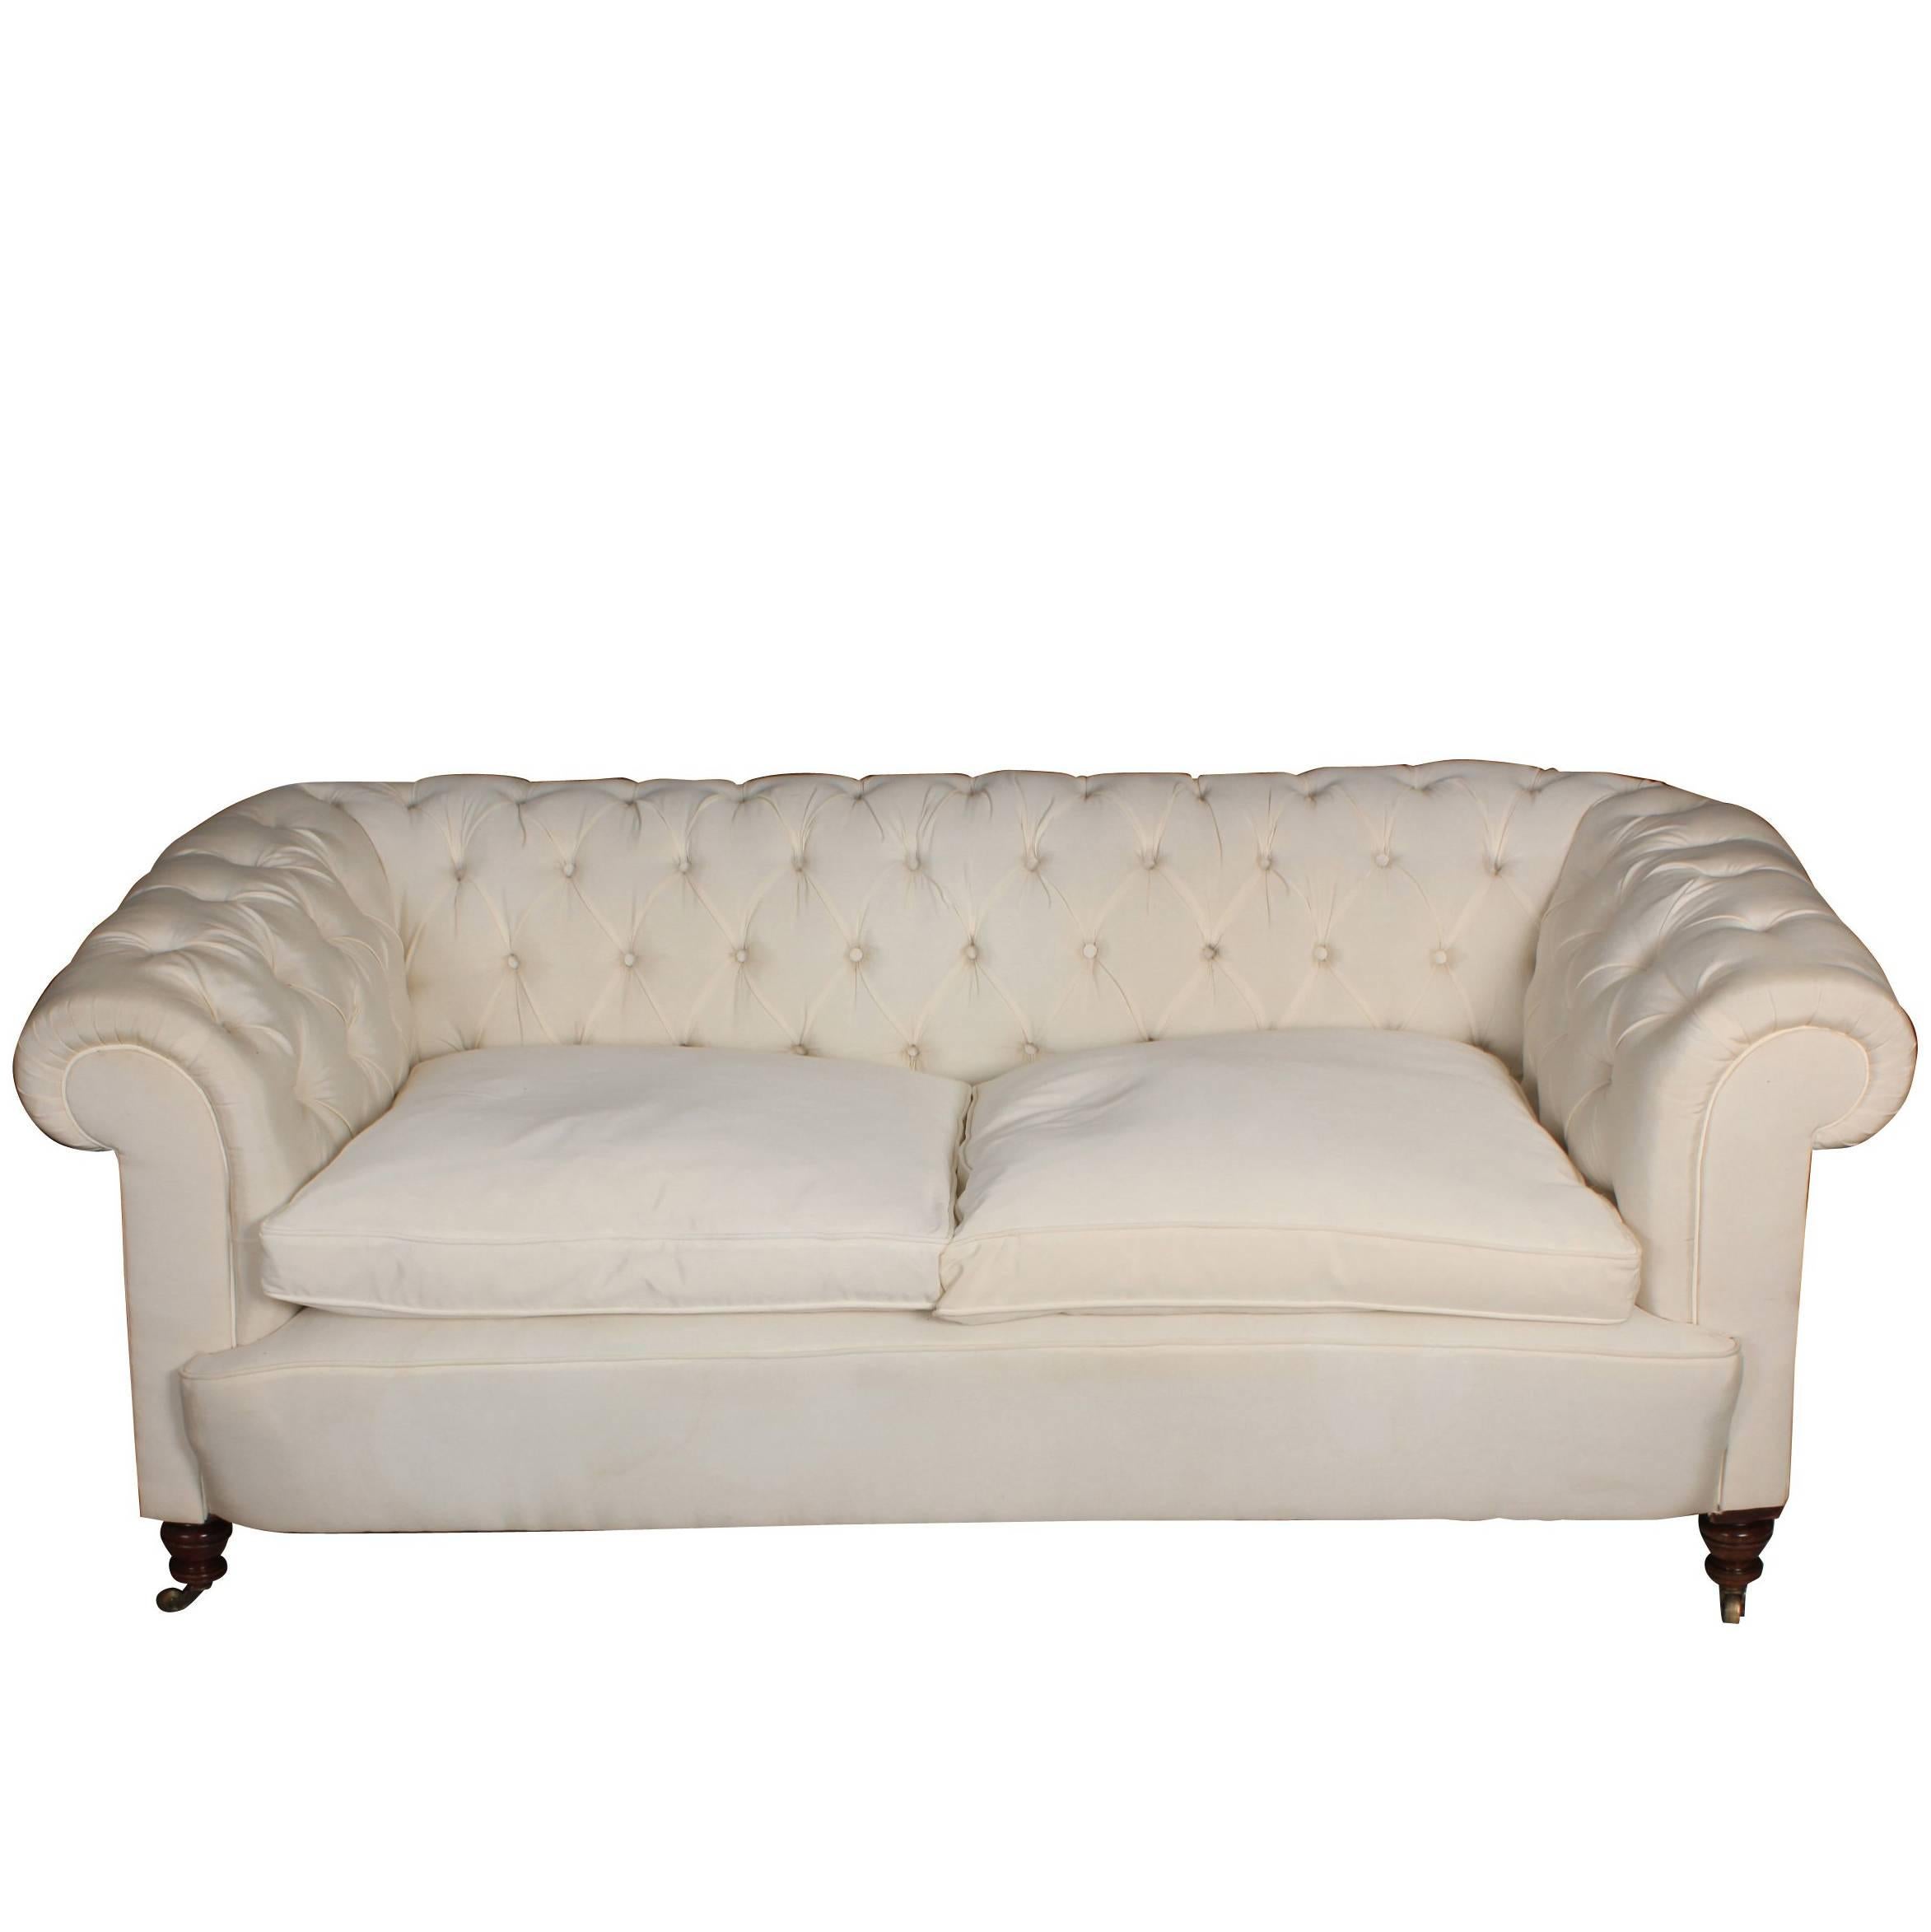 Victorian Chesterfield Sofa For Sale